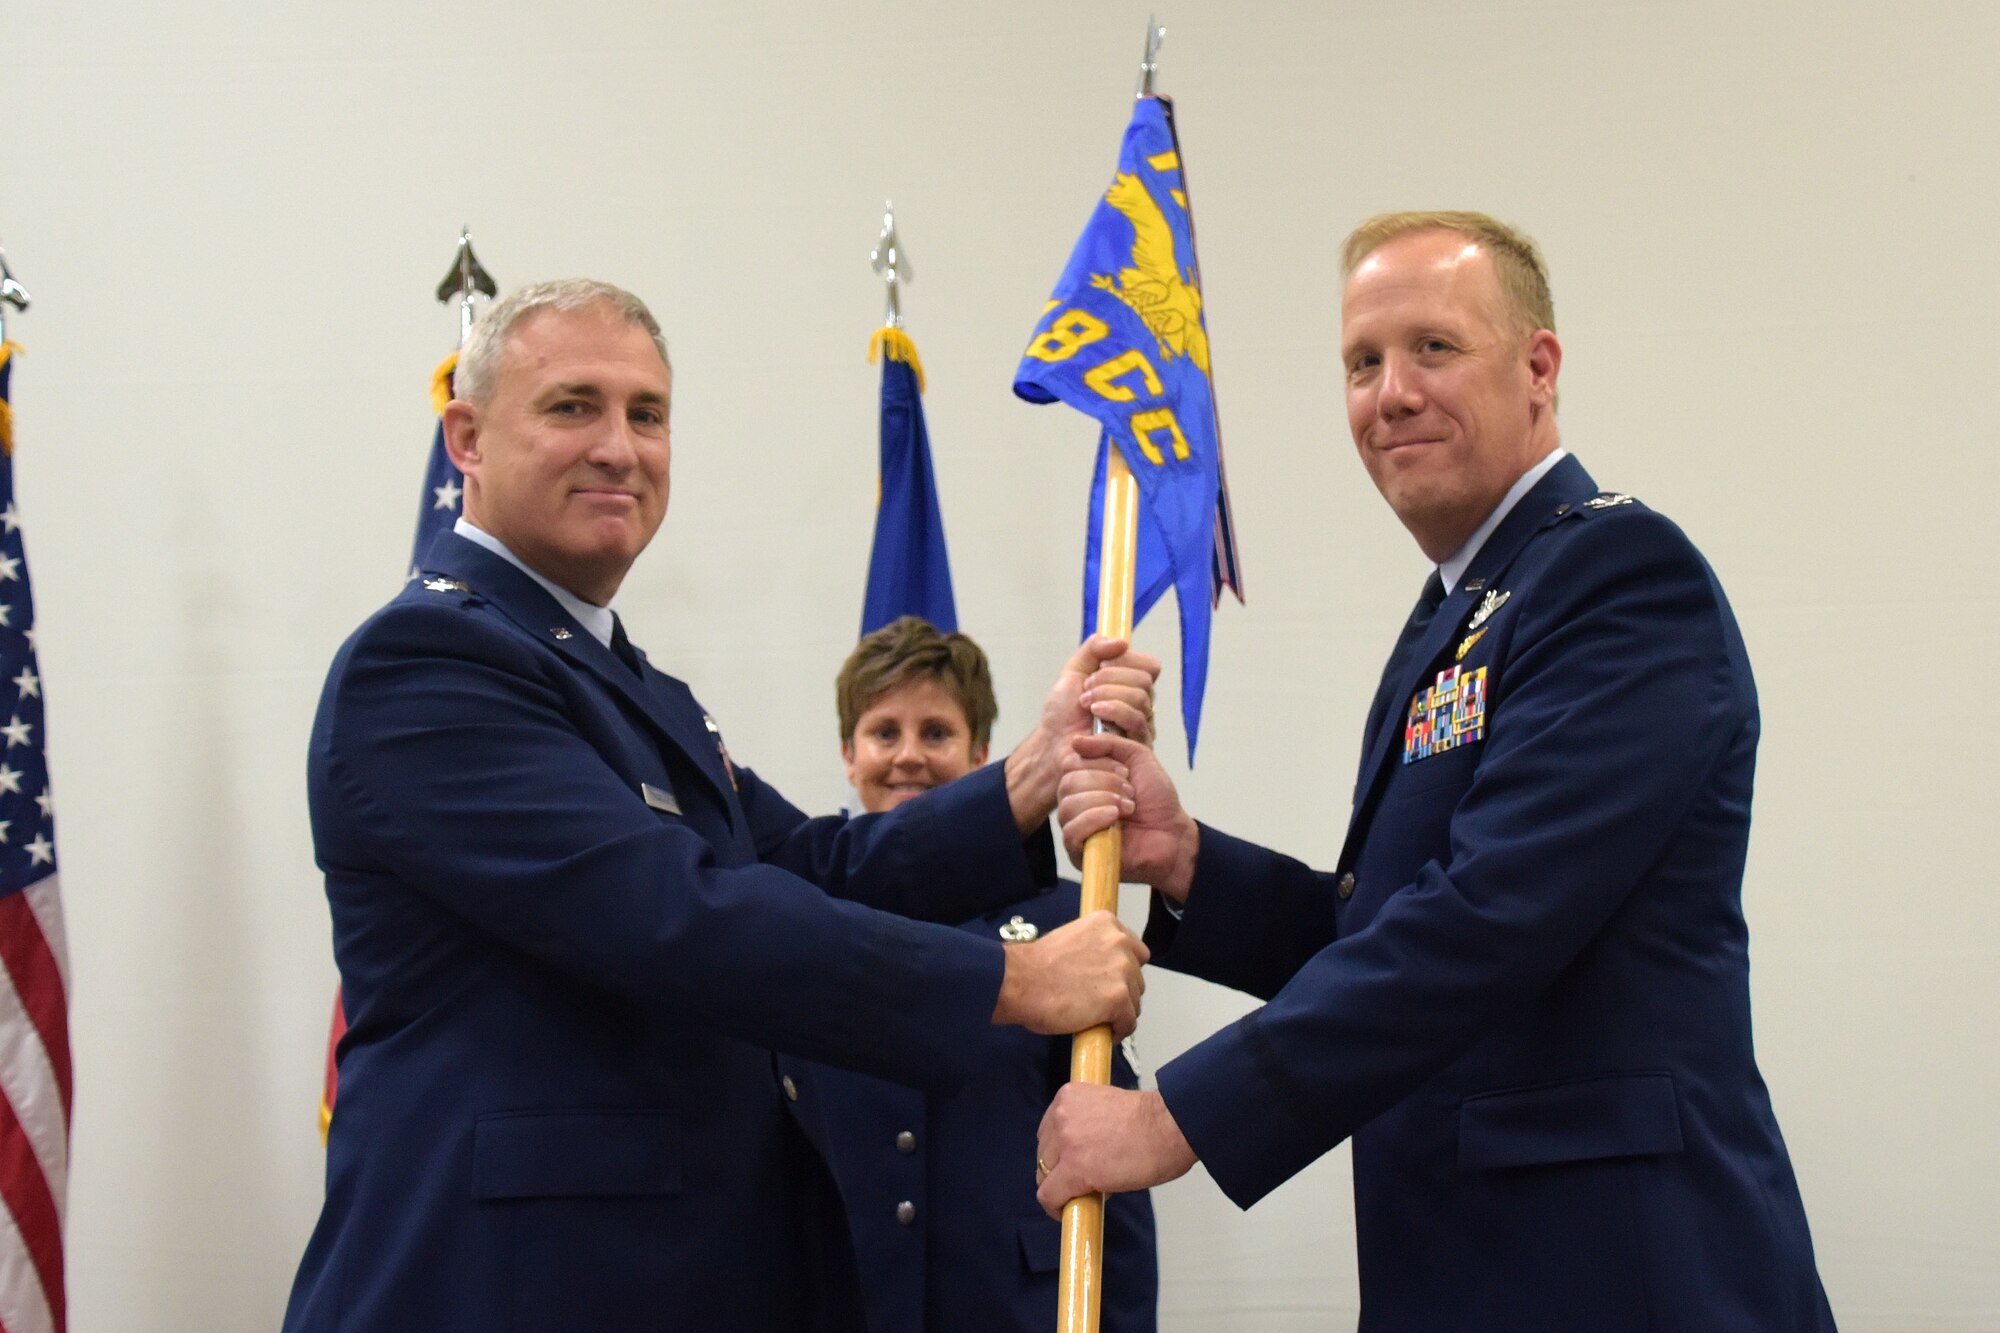 Col. Gregg Hesterman, the 178th Wing commander, assumes his new leadership position during a change of command ceremony at Springfield Air National Guard Base in Springfield, Ohio, Nov. 4, 2017. Maj. Gen. Stephen Markovich, the Ohio National Guard Commander for Air, passed the guidon to Hesterman. Col. John Knabel relinquished command and retired after 29 years of military service.